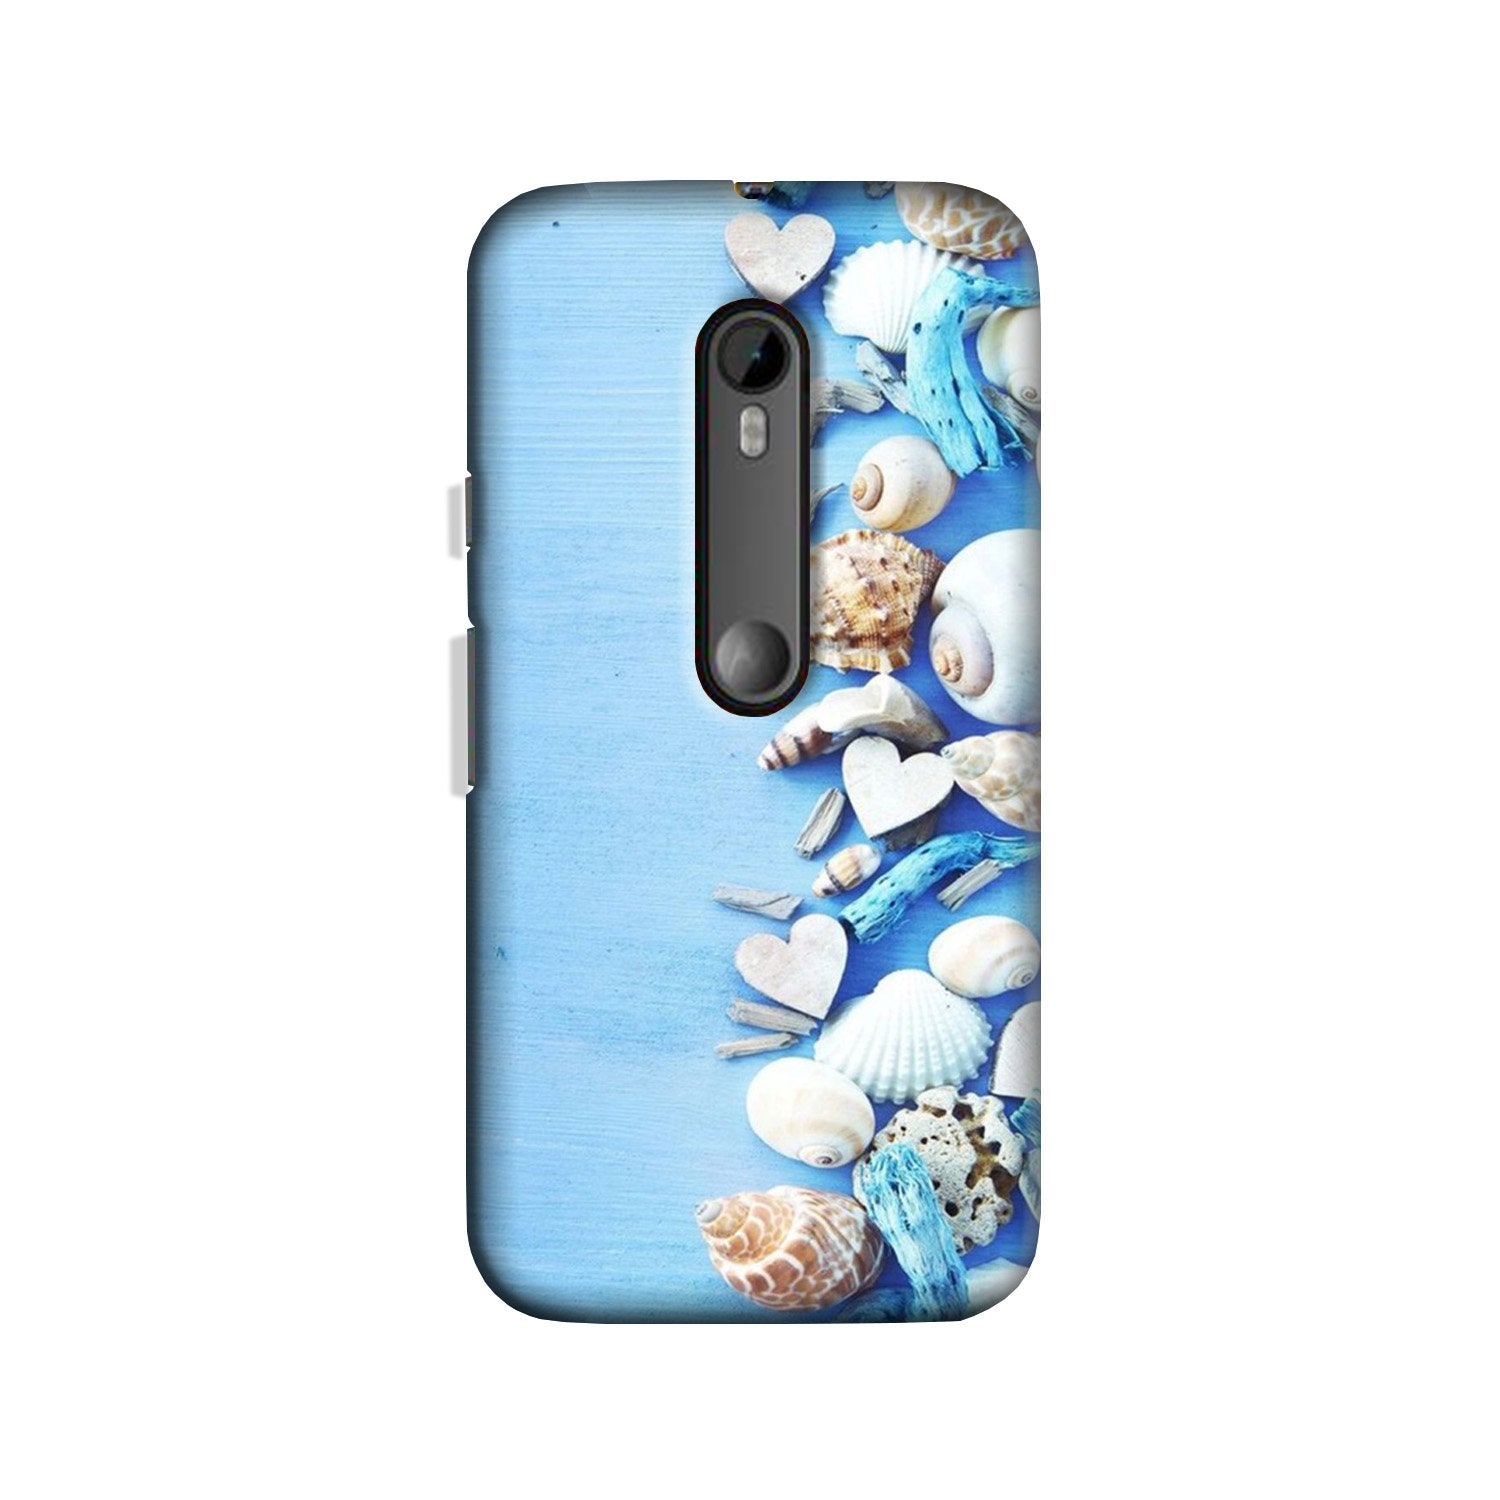 Sea Shells2 Case for Moto X Play